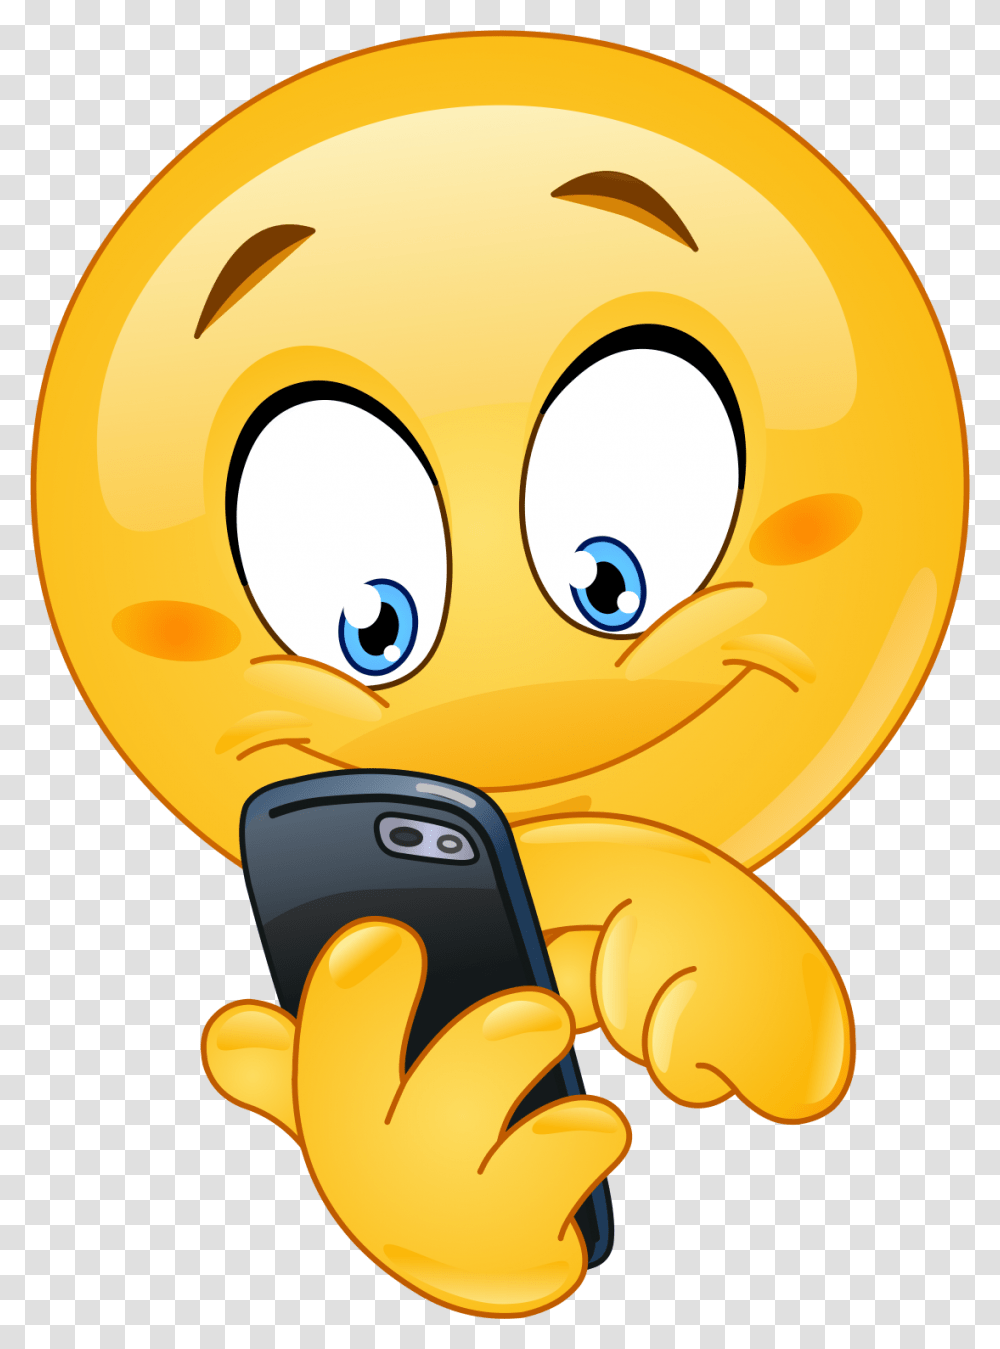 Cell Phone Emoji Decal, Electronics, Mobile Phone, Texting, Hand-Held Computer Transparent Png